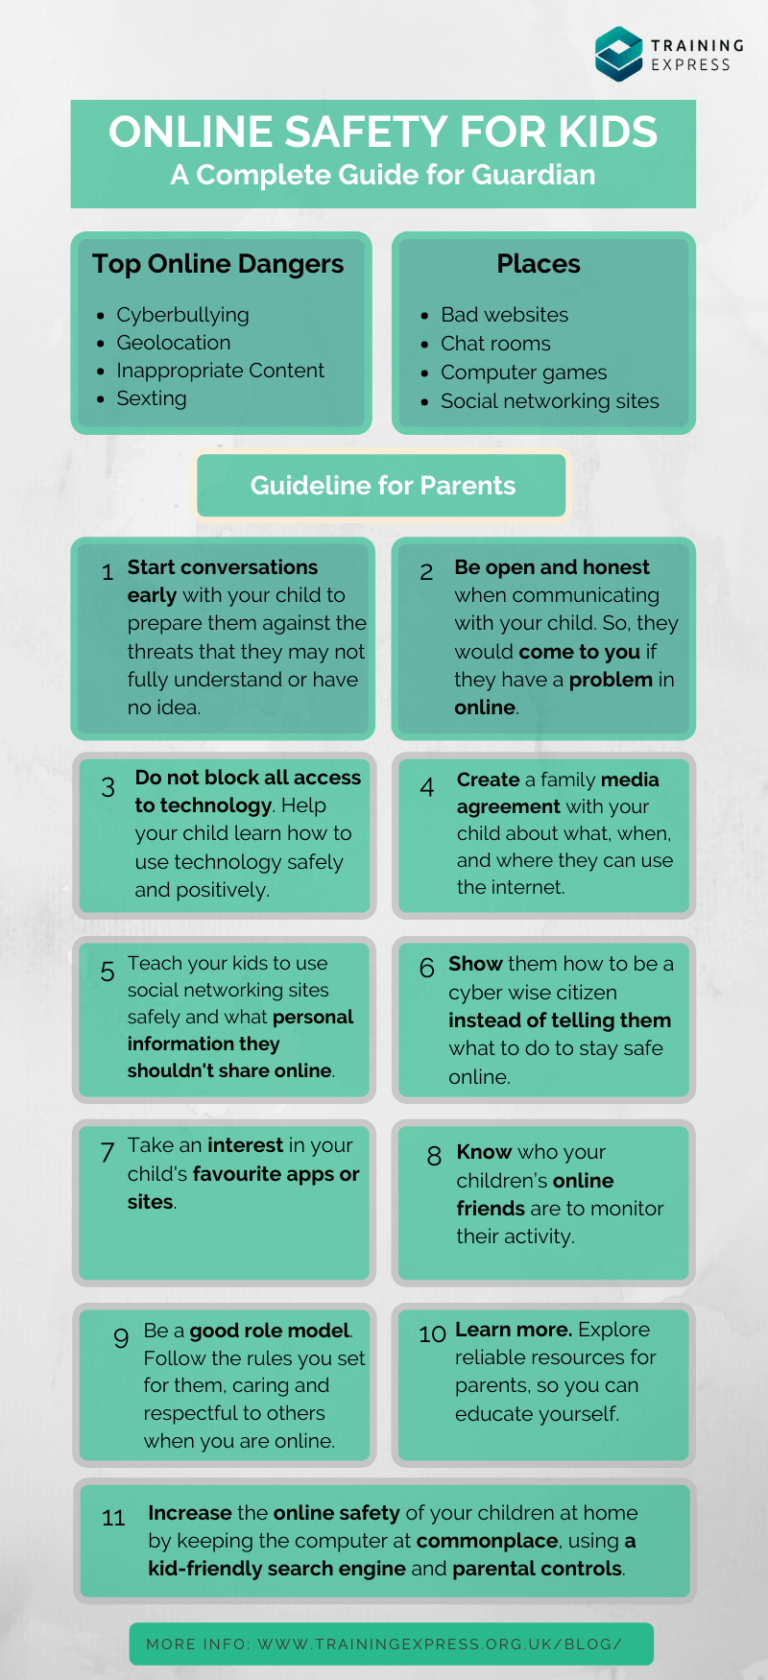 Online Safety for Kids: infographic